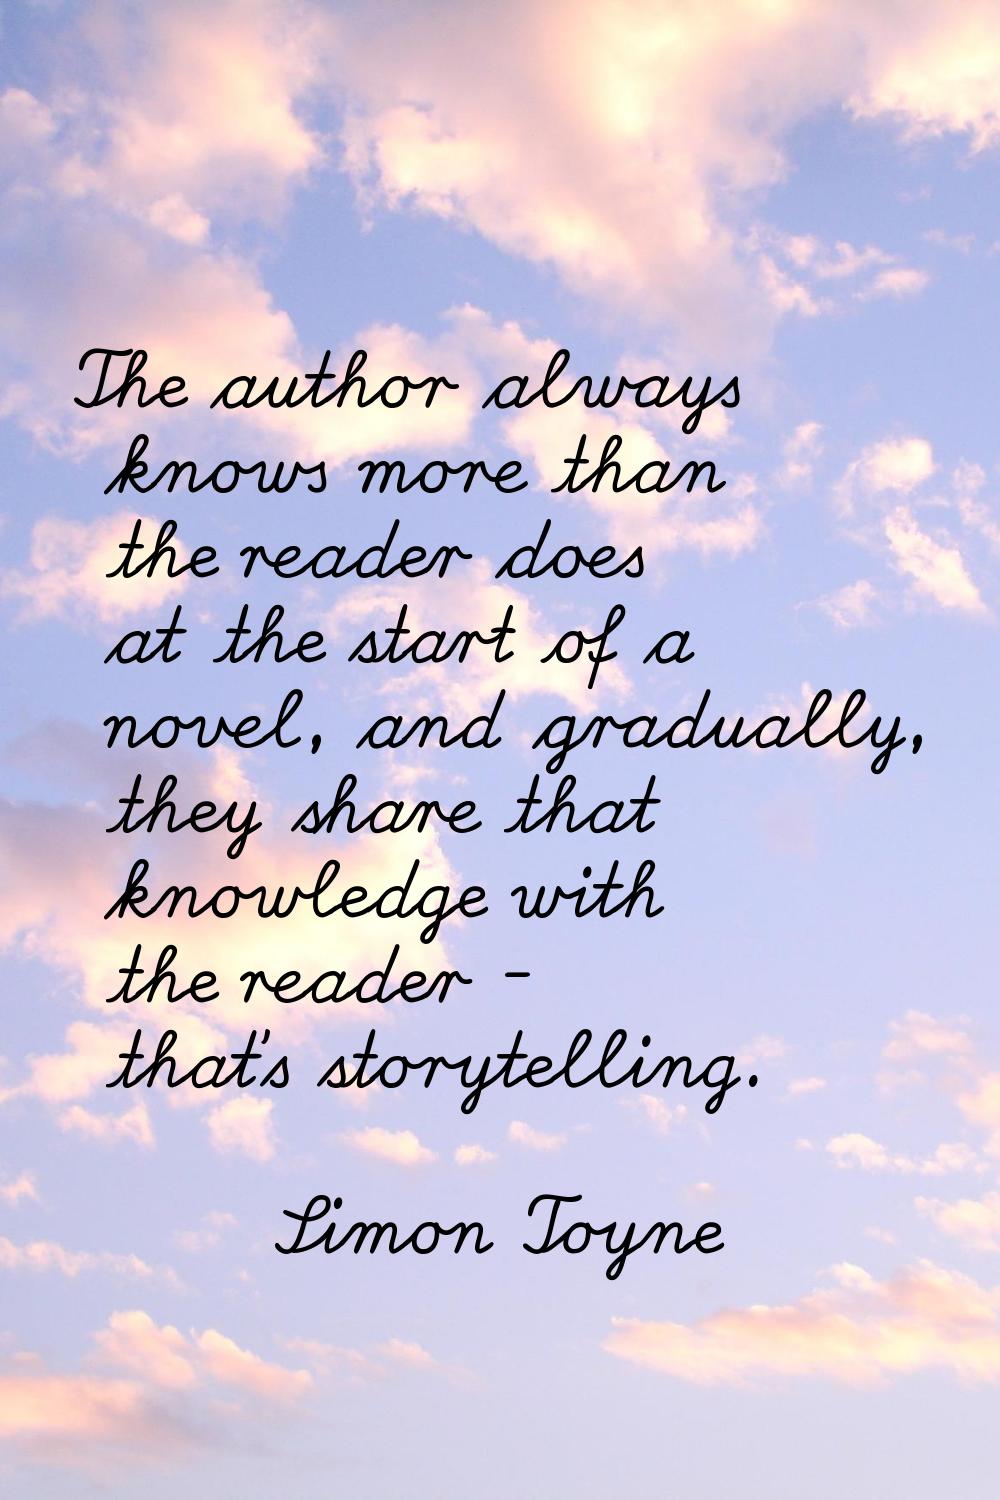 The author always knows more than the reader does at the start of a novel, and gradually, they shar